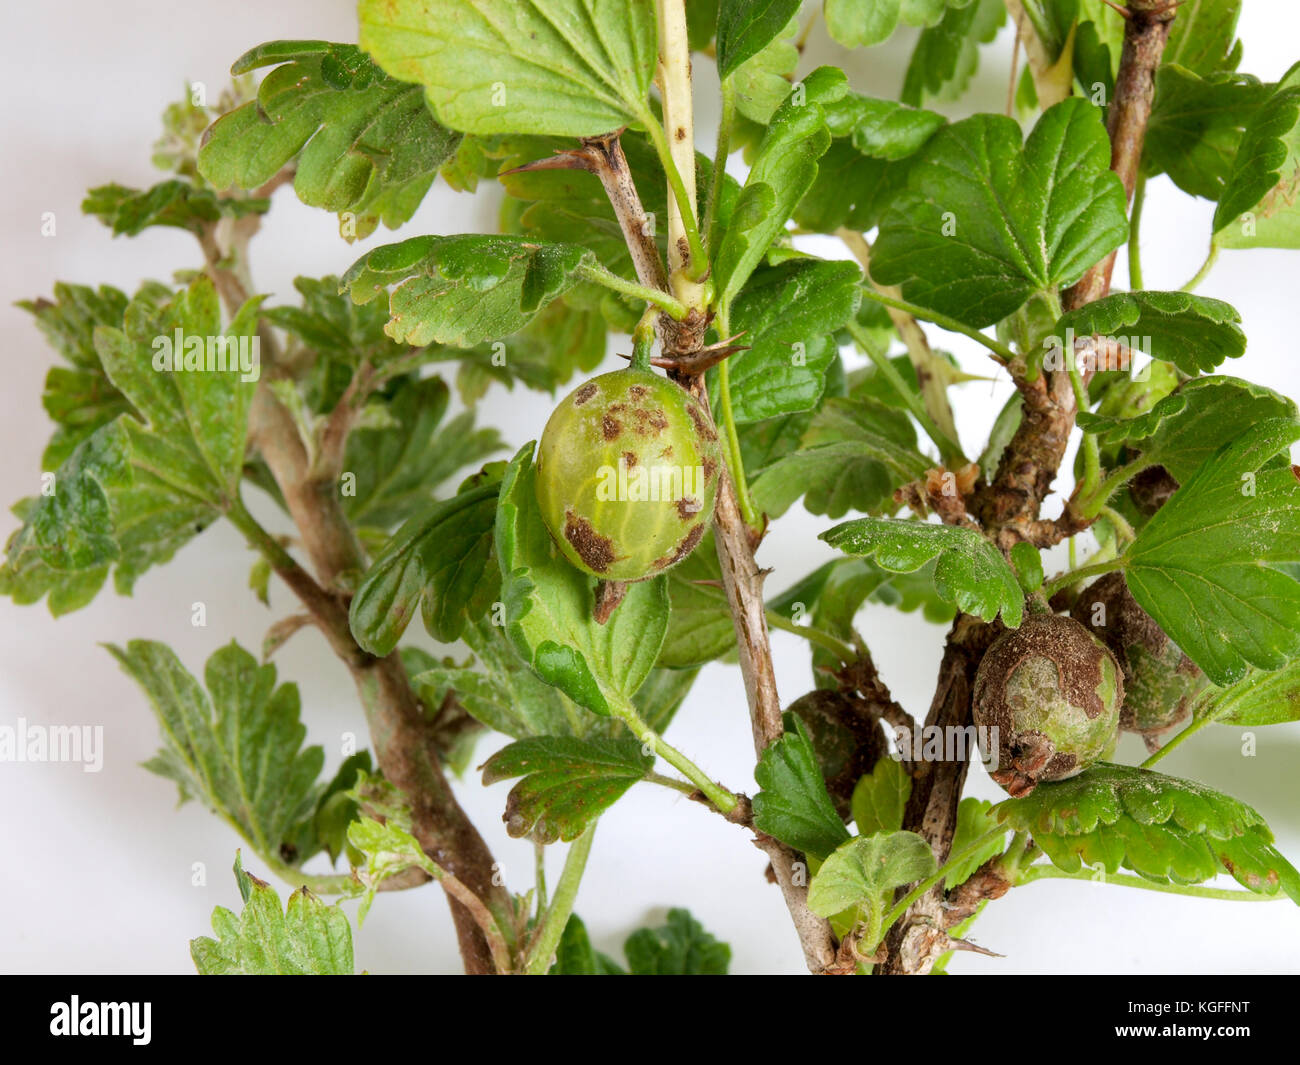 Gooseberries infected and damaged by fungus disease powdery mildew close up. Stock Photo